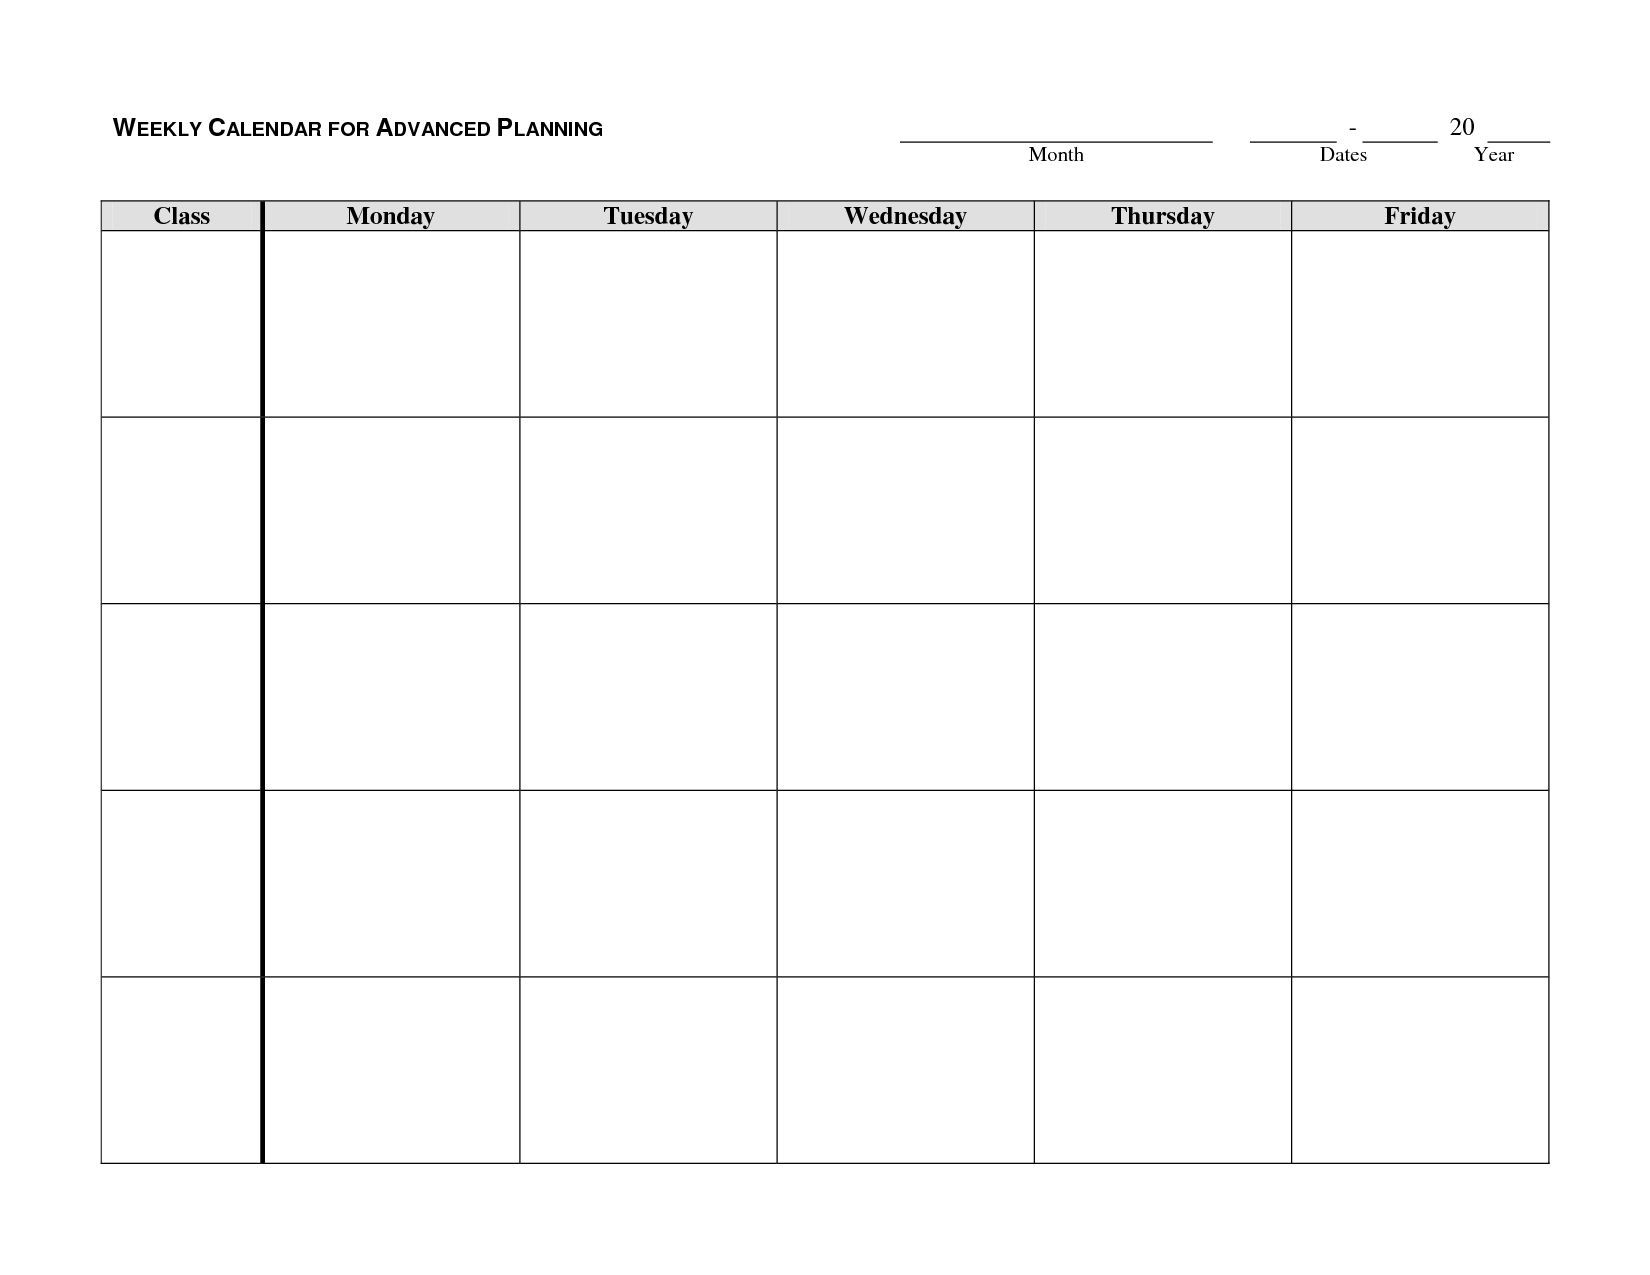 Monday Through Friday Blank Schedule Print Out In 2020